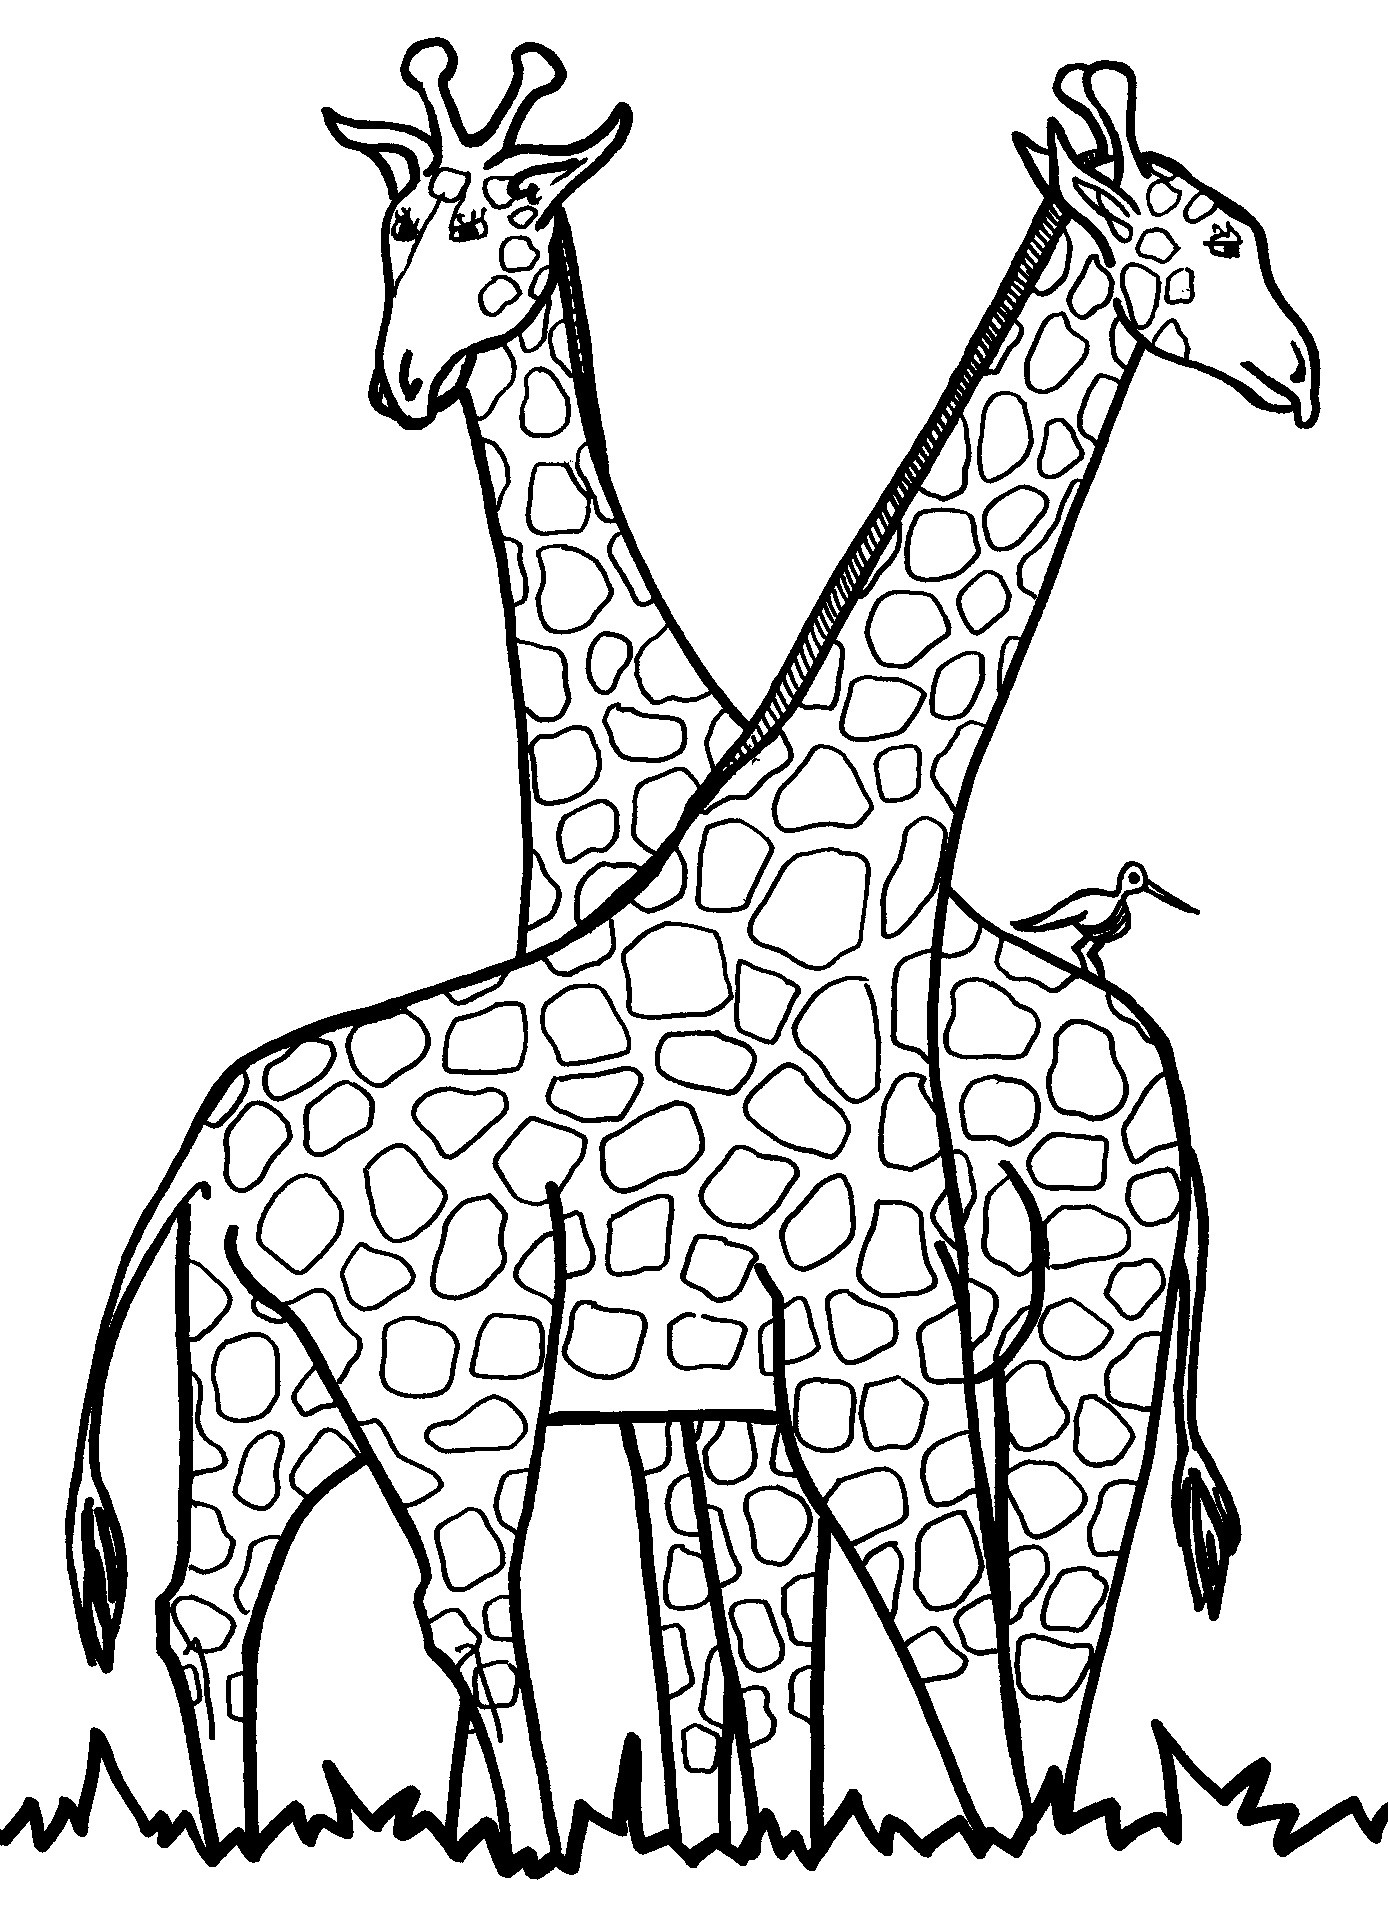 Giraffe Coloring Pages For Kids
 Free Printable Giraffe Coloring Pages For Kids